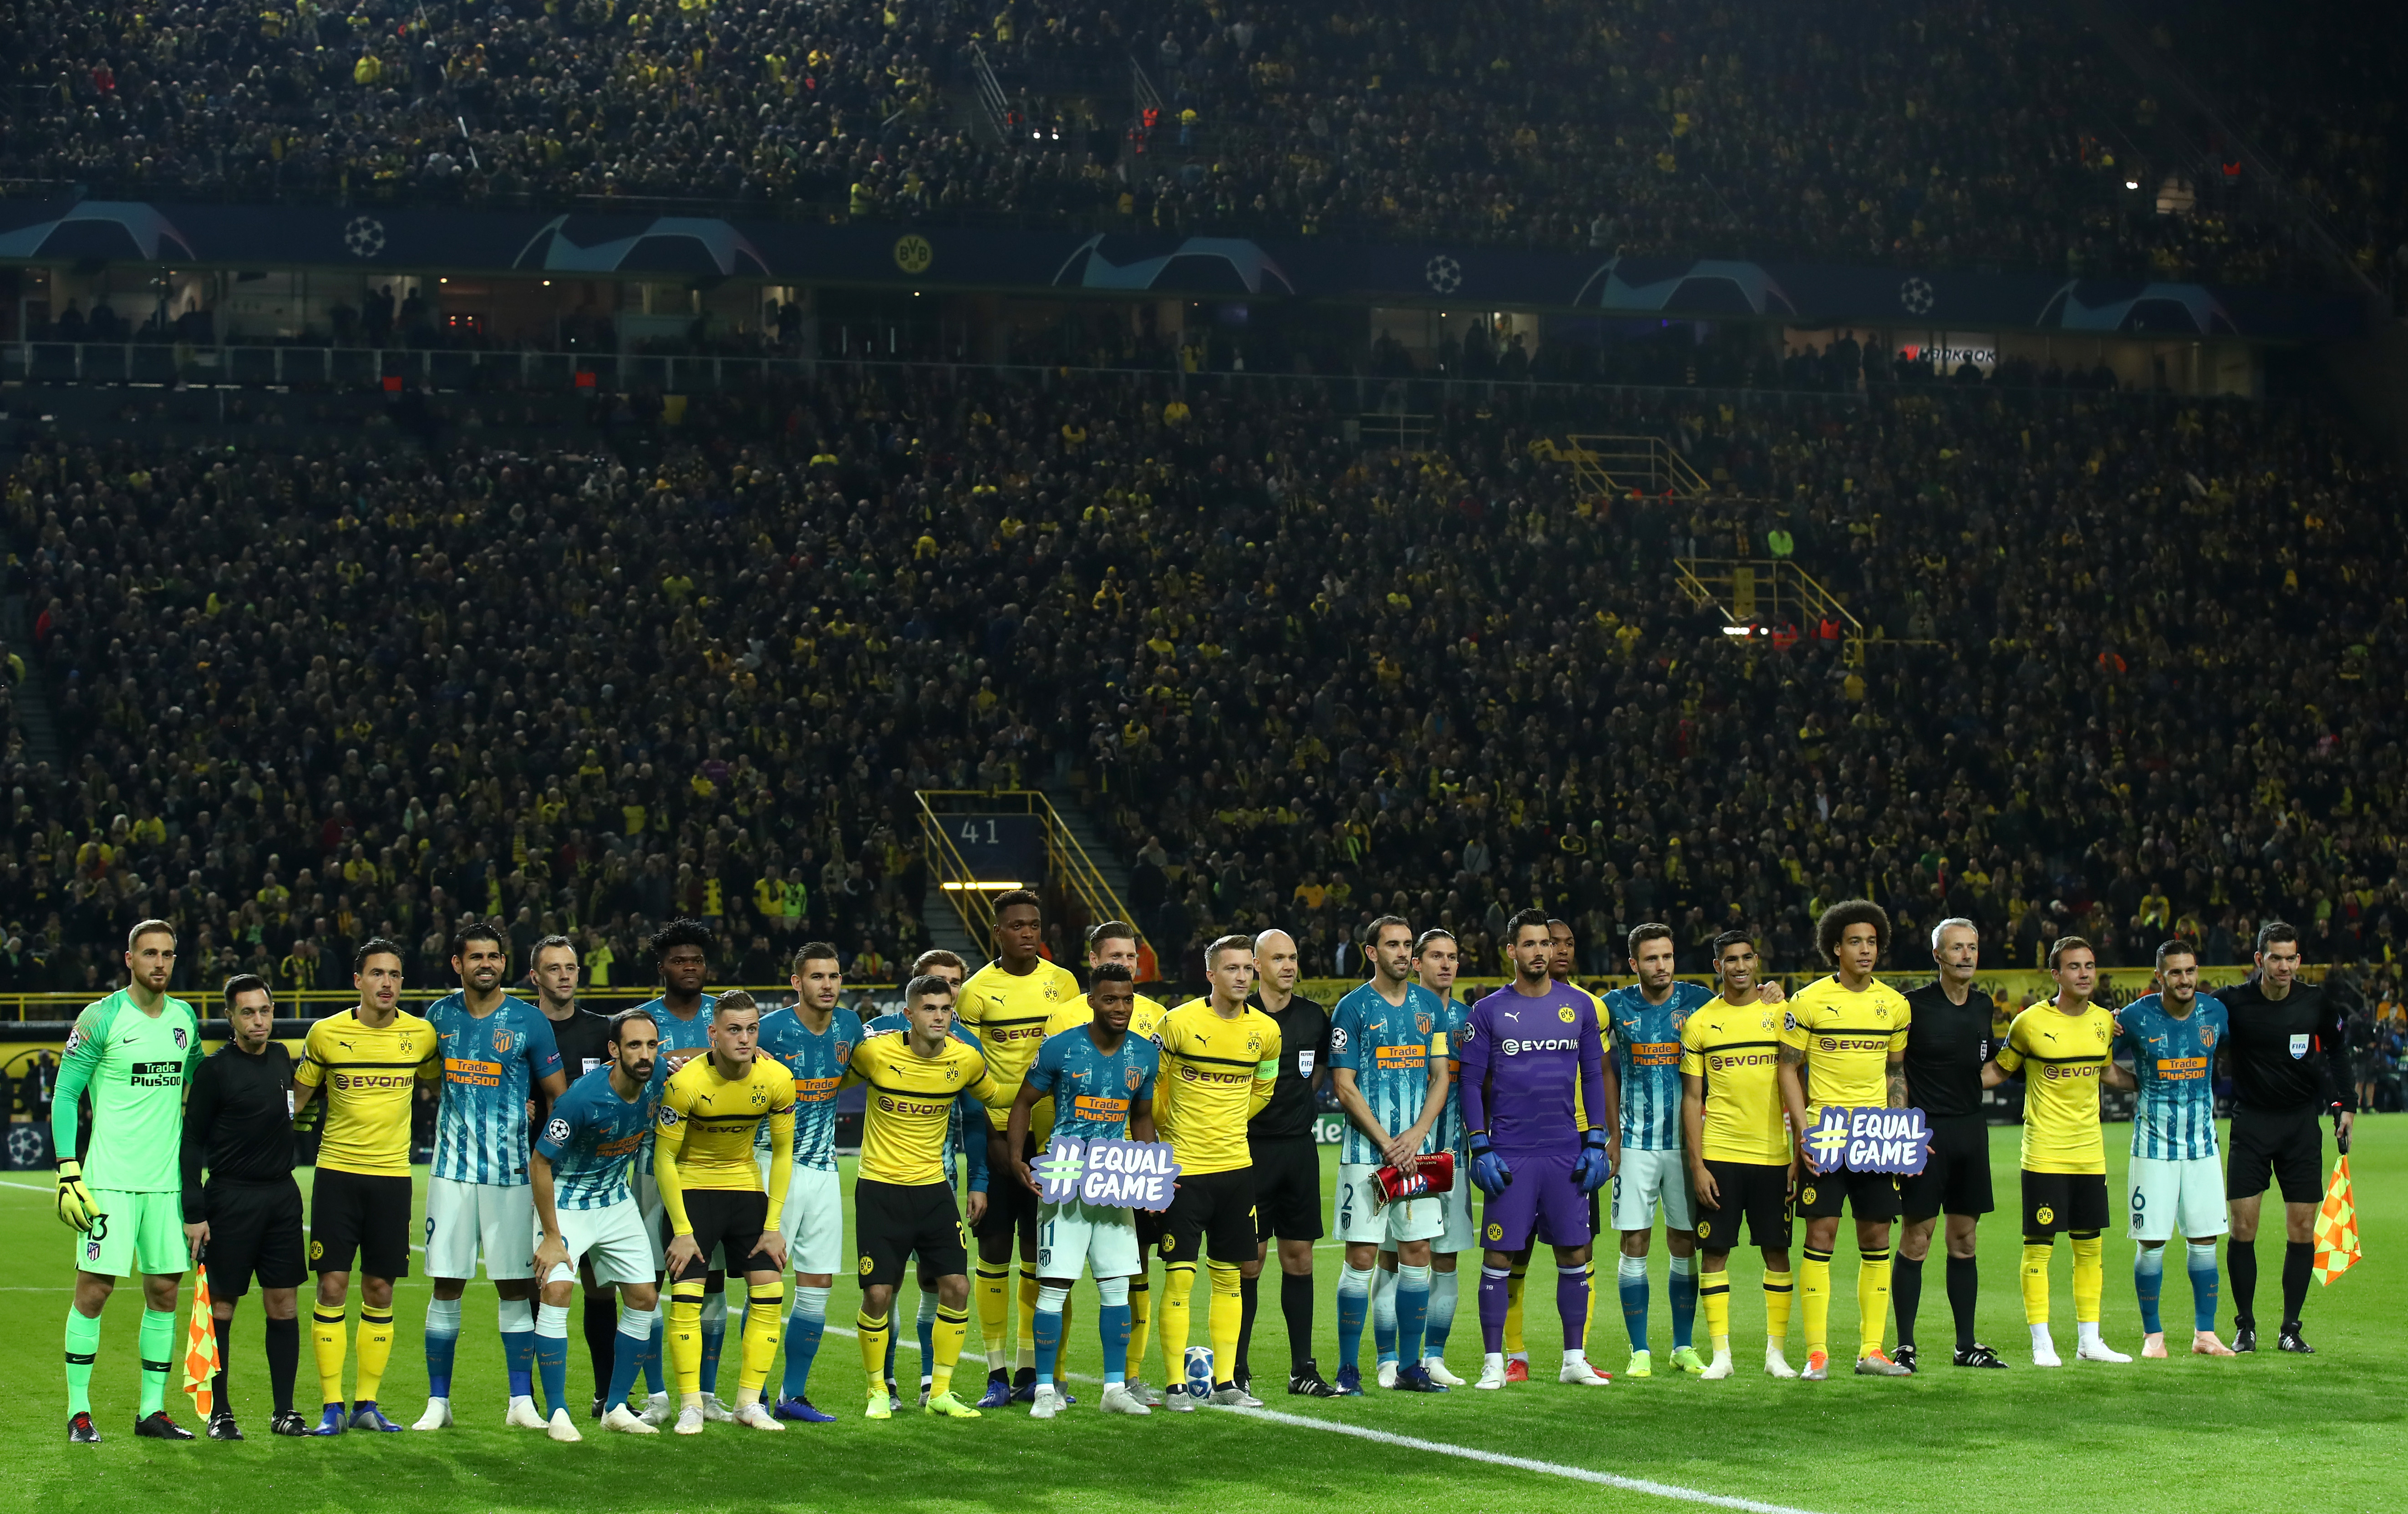 DORTMUND, GERMANY - OCTOBER 24: Borussia Dortmund and Club Atletico de Madrid players line up prior to the Group A match of the UEFA Champions League between Borussia Dortmund and Club Atletico de Madrid at Signal Iduna Park on October 24, 2018 in Dortmund, Germany.  (Photo by Alex Grimm/Bongarts/Getty Images)